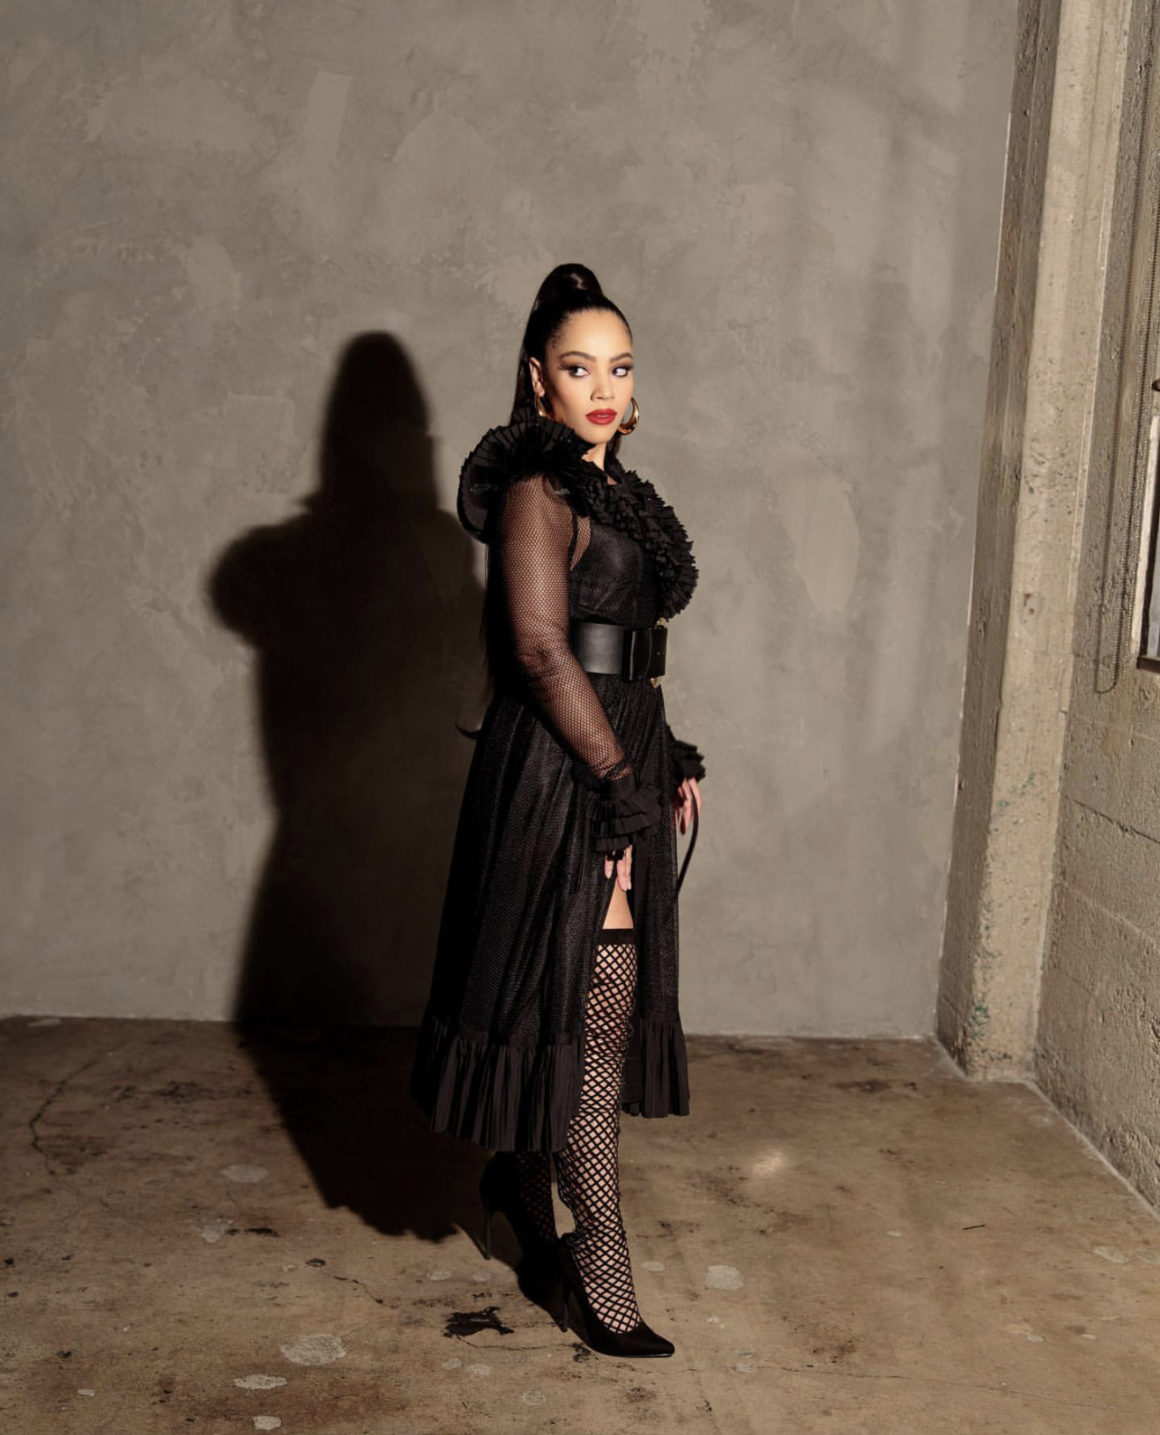 Bianca Lawson Posed for a Shoot Wearing UNTTLD Black Ruffled Fishnet Mesh Dress With Berna Peci Gold Hoops and Nasty Gal Accessories4